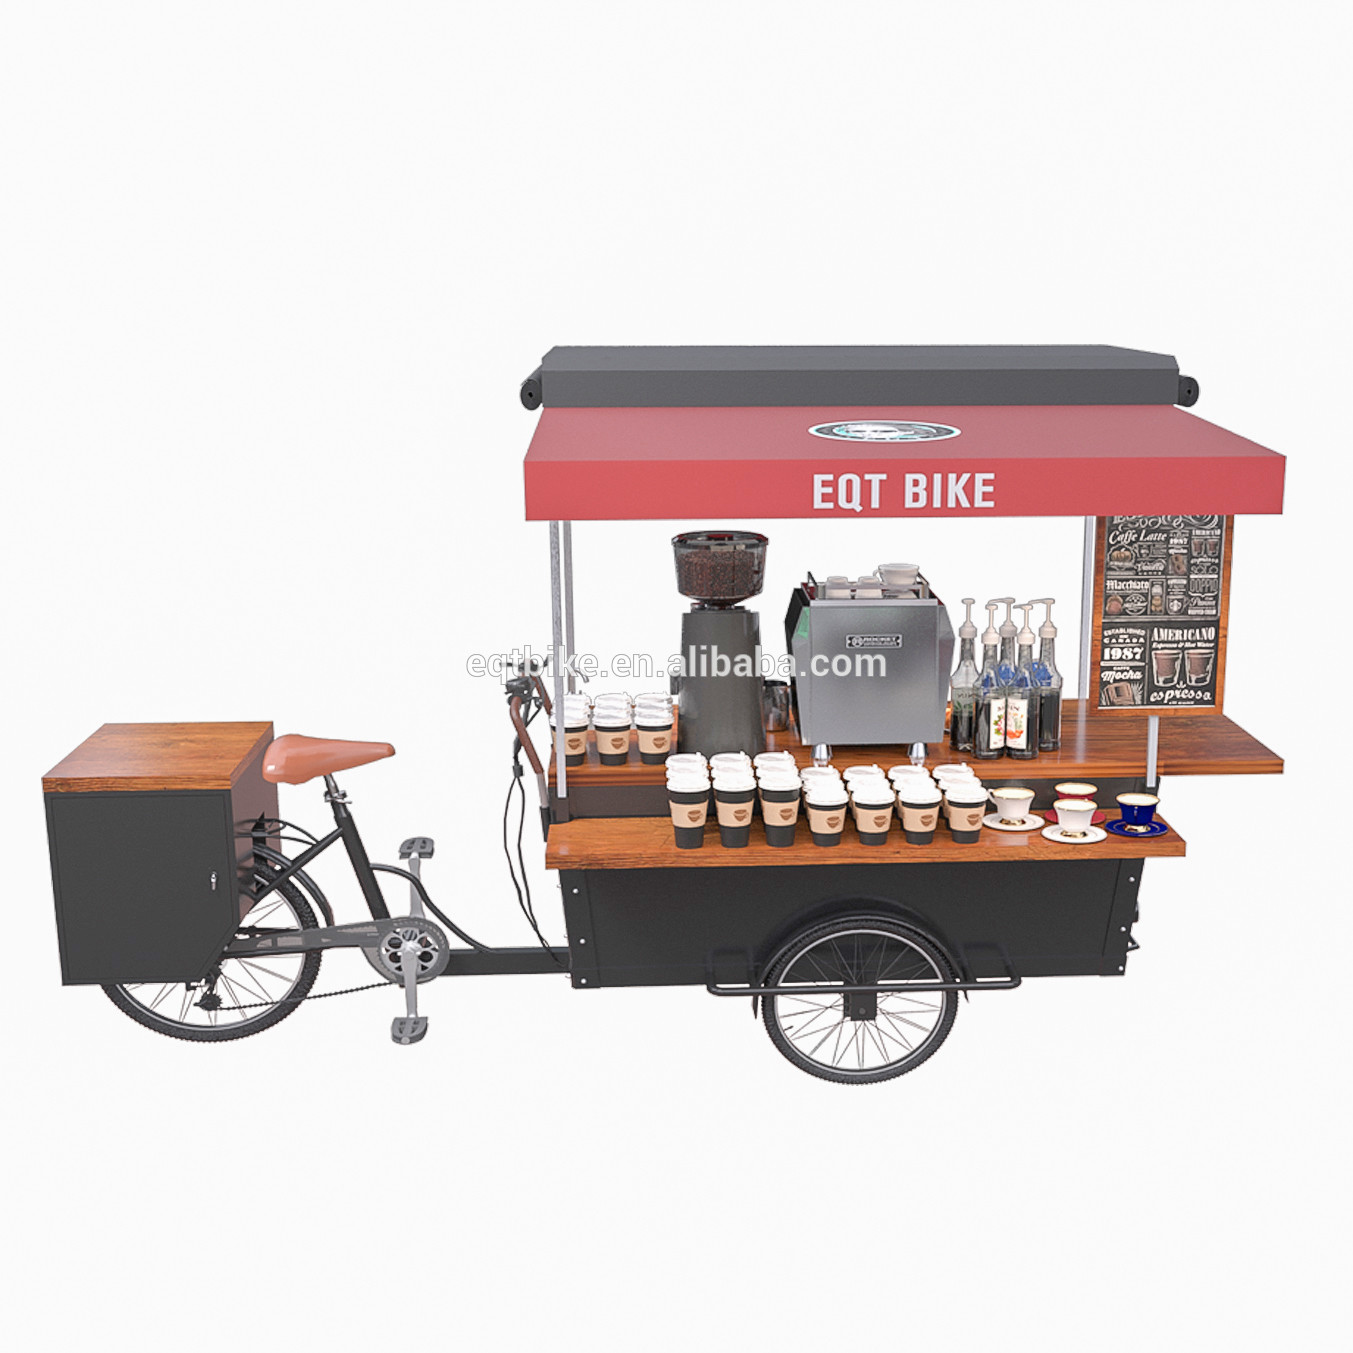 125L Box Structure Disc Brake Tricycle Coffee Cart